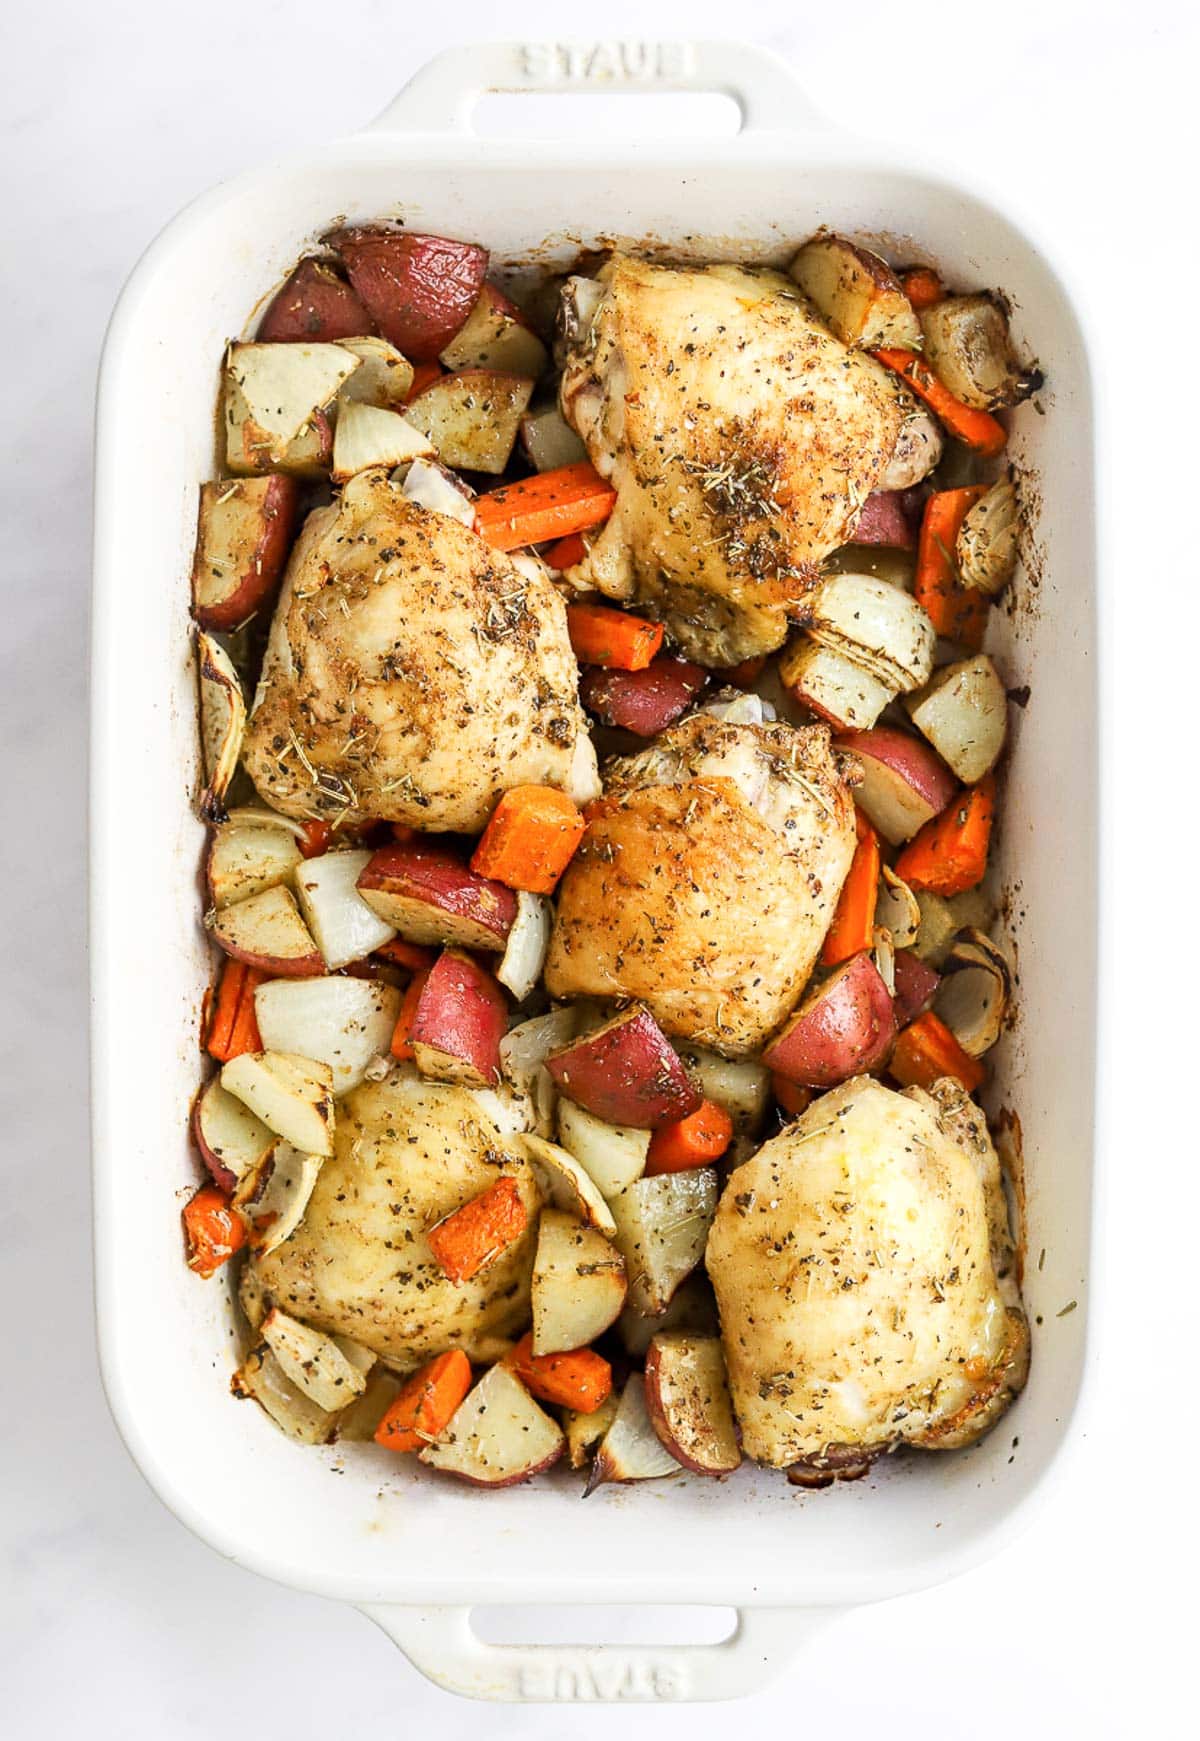 Roasted chicken thighs and potatoes and carrots in white baking dish.